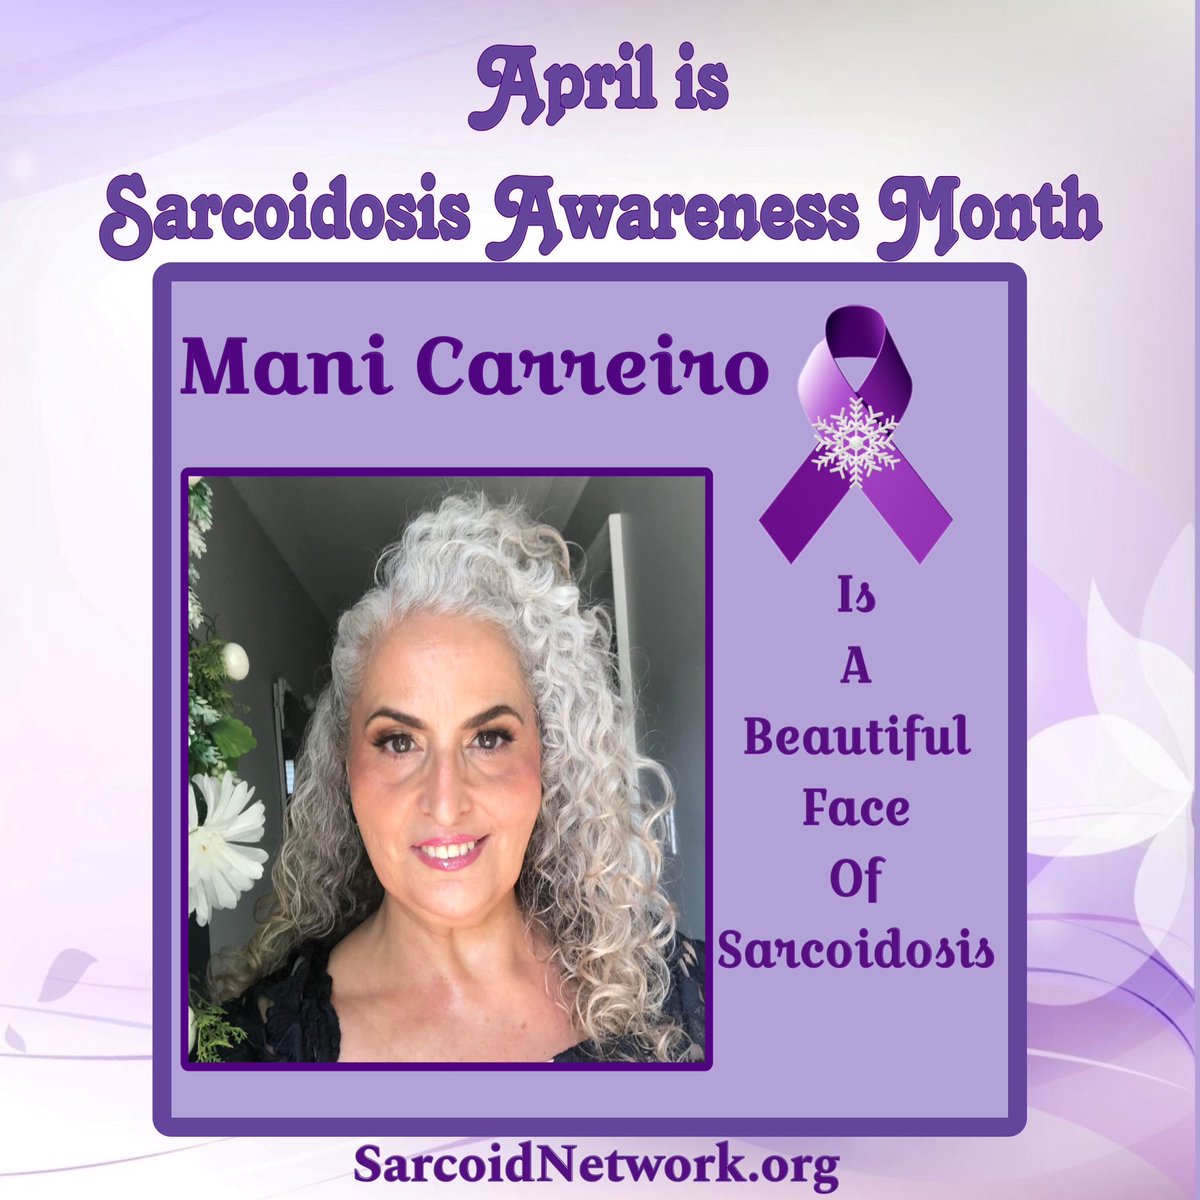 This is our Sarcoidosis Sister Mani Carreiro and she is a Beautiful Faces of Sarcoidosis!💜

Today is Mani’s Birthday so let’s send her bunches of birthday wishes!💜🎂🎉

#Sarcoidosis #raredisease #patientadvocate  #beautifulfacesofsarcoidosis #sarcoidosisawarenessmonth